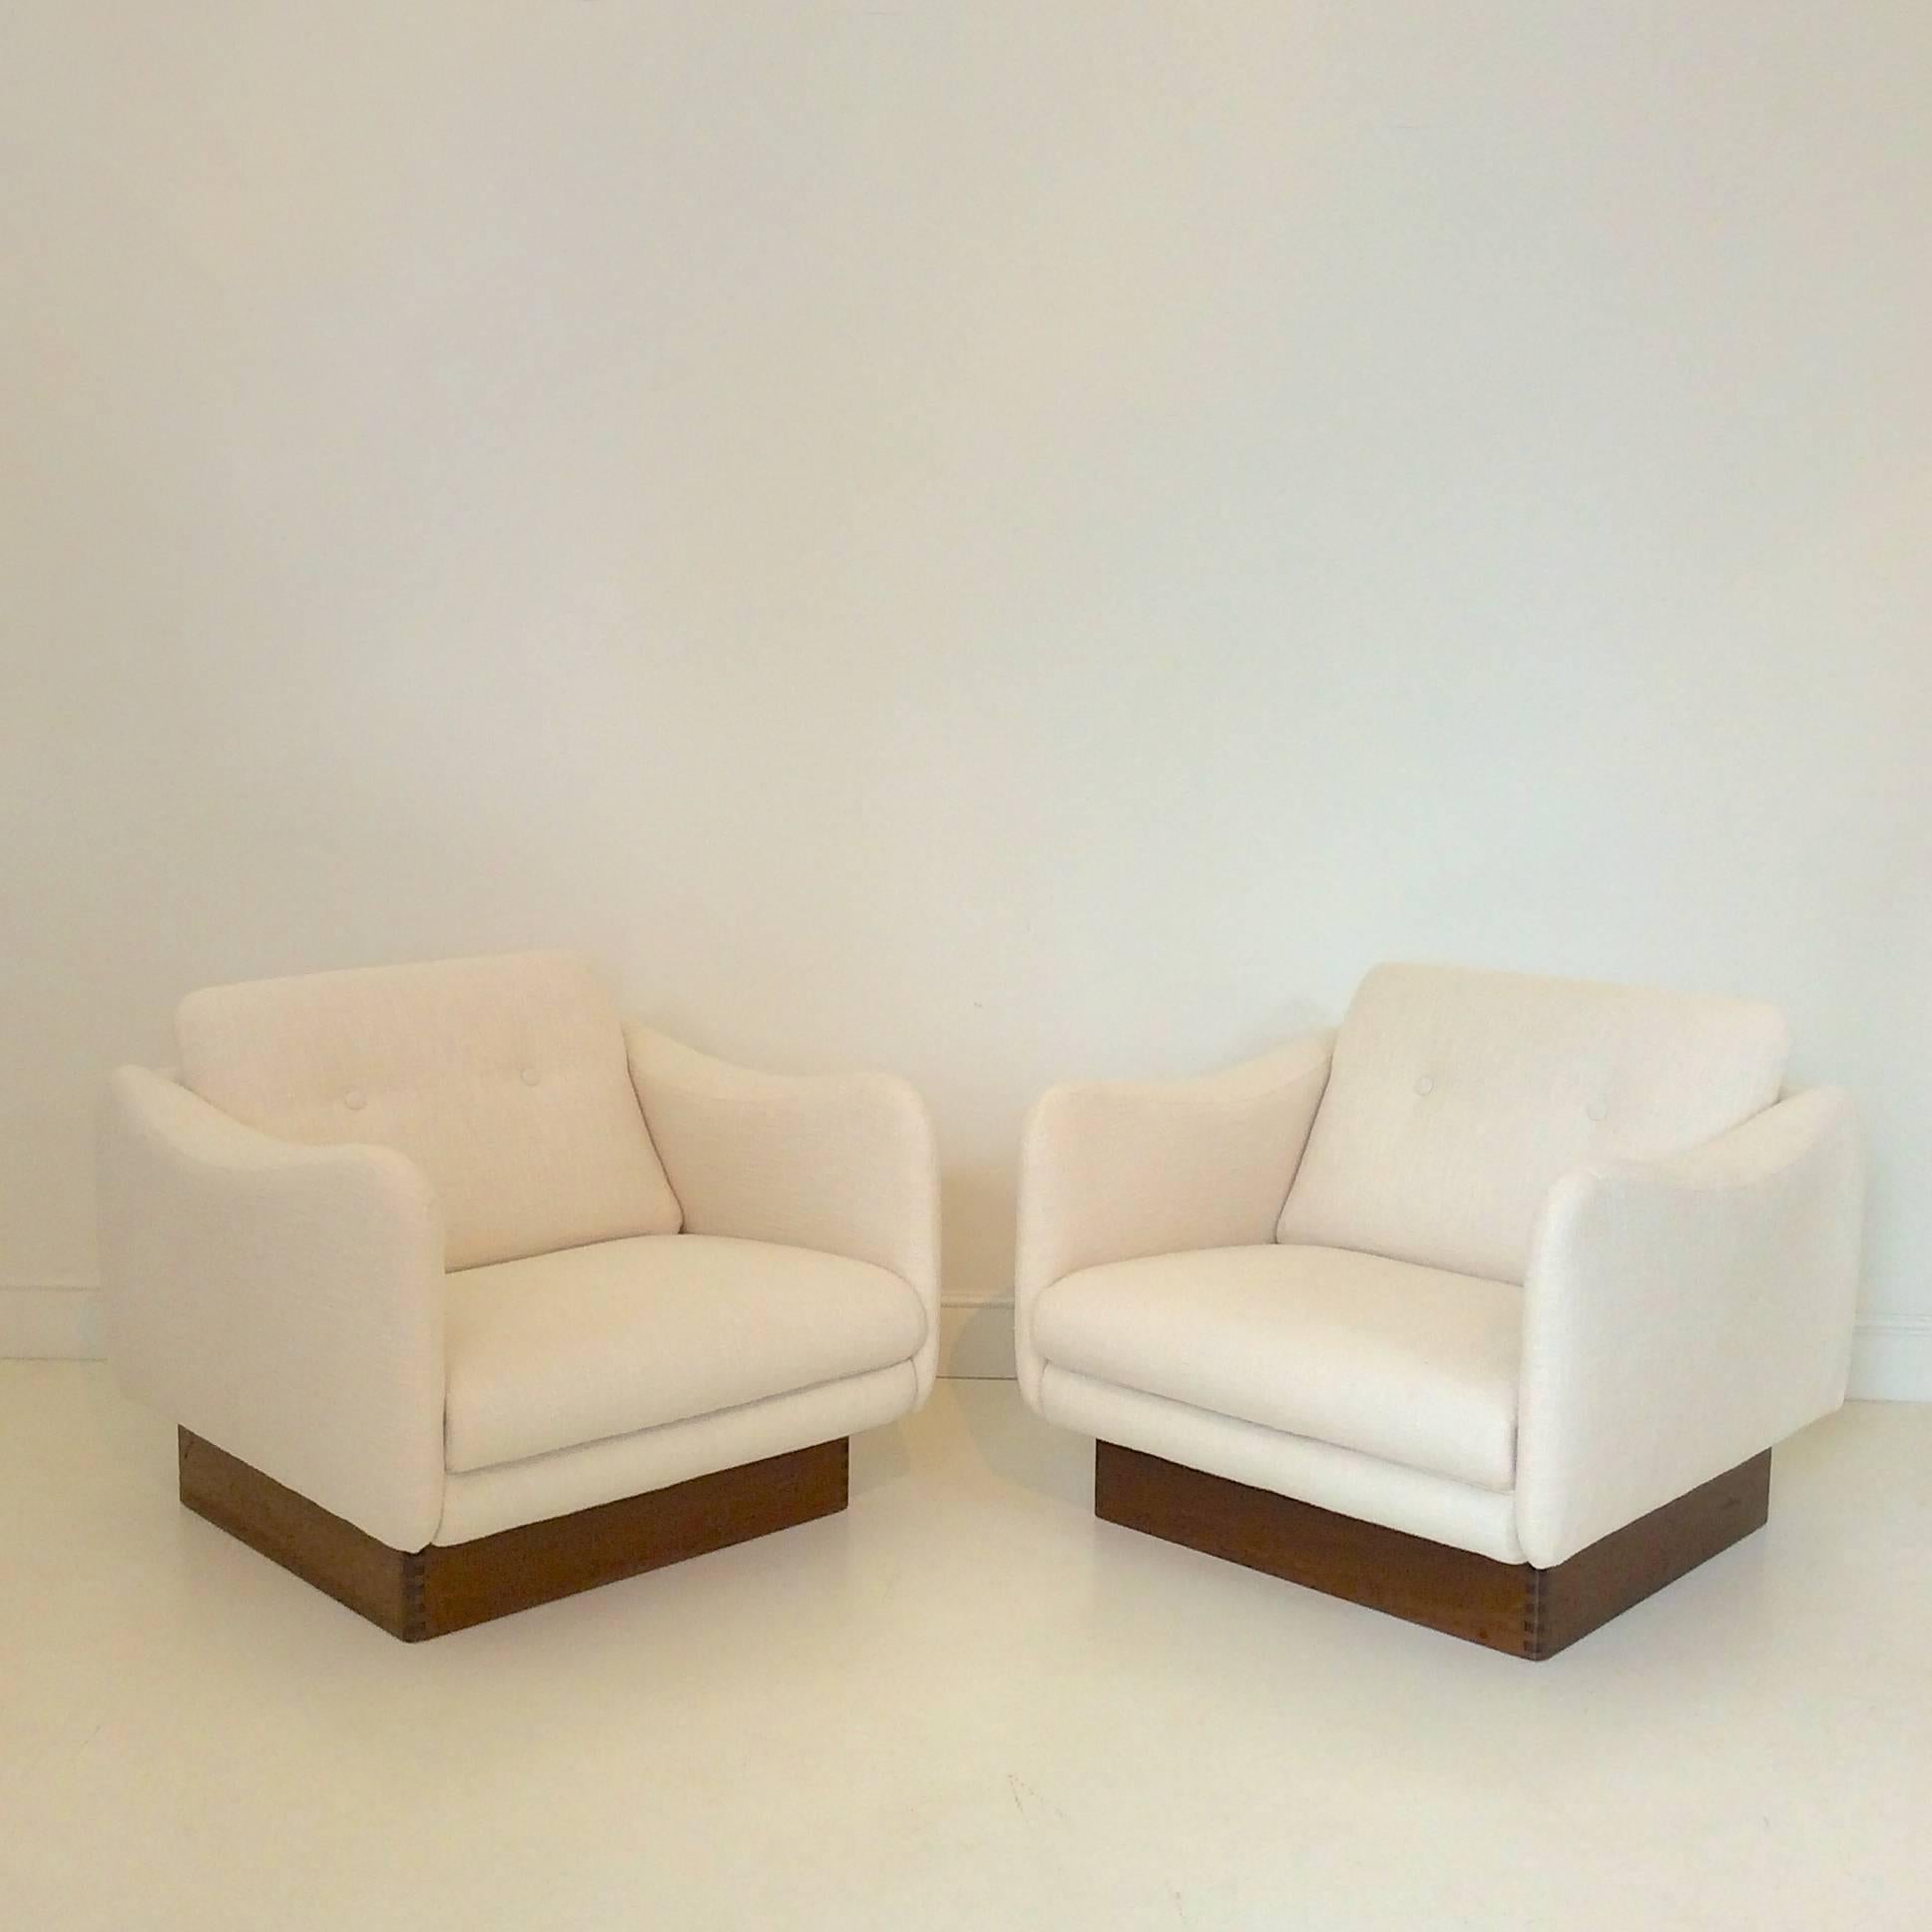 Very nice Michel Mortier armchairs, teckel model for Steiner, France, circa 1963
New ivory upholstery, original wood base.
Dimensions: H 57 cm, W 75 cm, D 75 cm.
Very good condition.
We ship anywhere in the world, please feel free to request a